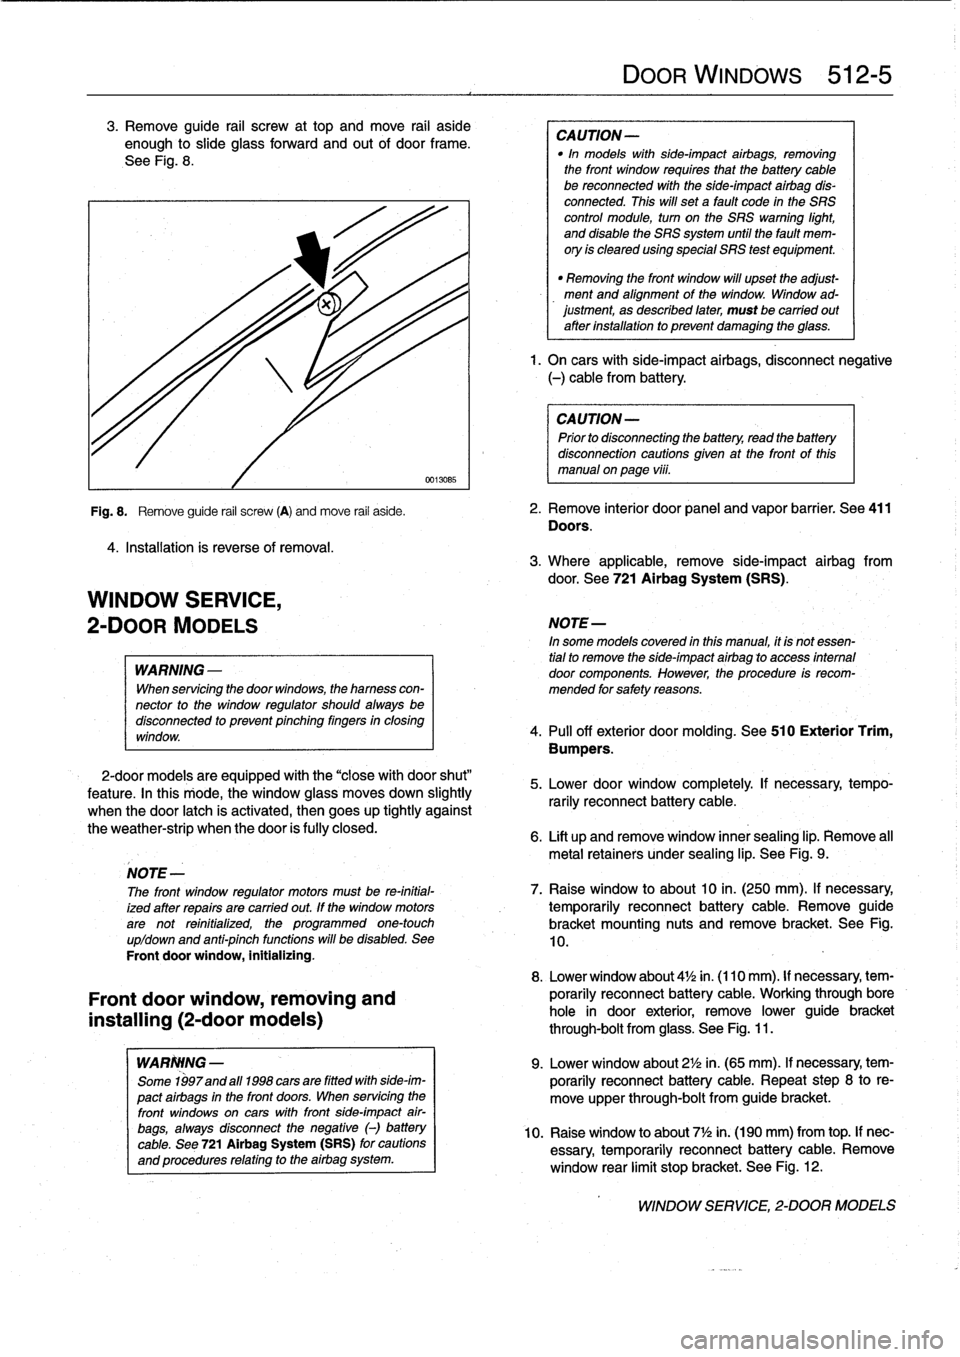 BMW 318i 1997 E36 Workshop Manual 
3
.
Remove
guide
rail
screw
at
top
and
move
rail
aside
enough
to
slide
glass
forward
and
out
of
door
frame
.

See
Fig
.
8
.

4
.
Installation
is
reverse
of
removal
.

WINDOW
SERVICE,

2-DOOR
MODELS

